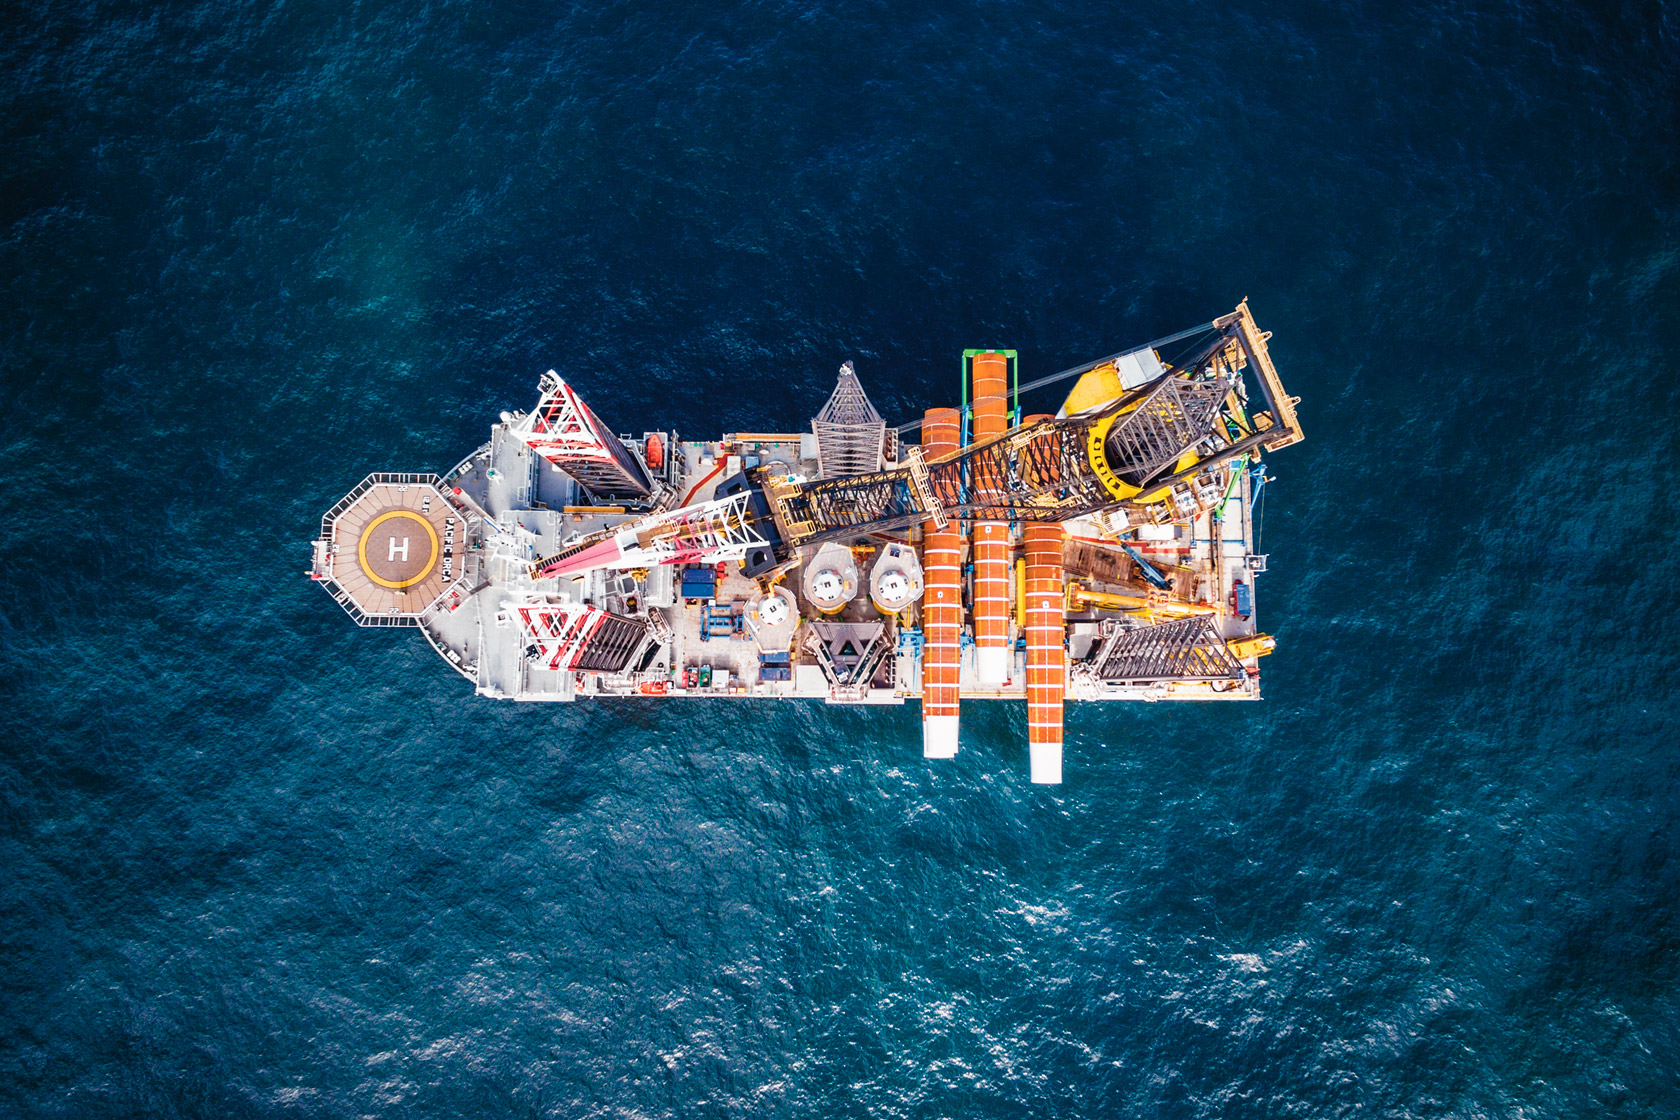 An installation vessel at Sandbank viewed from above